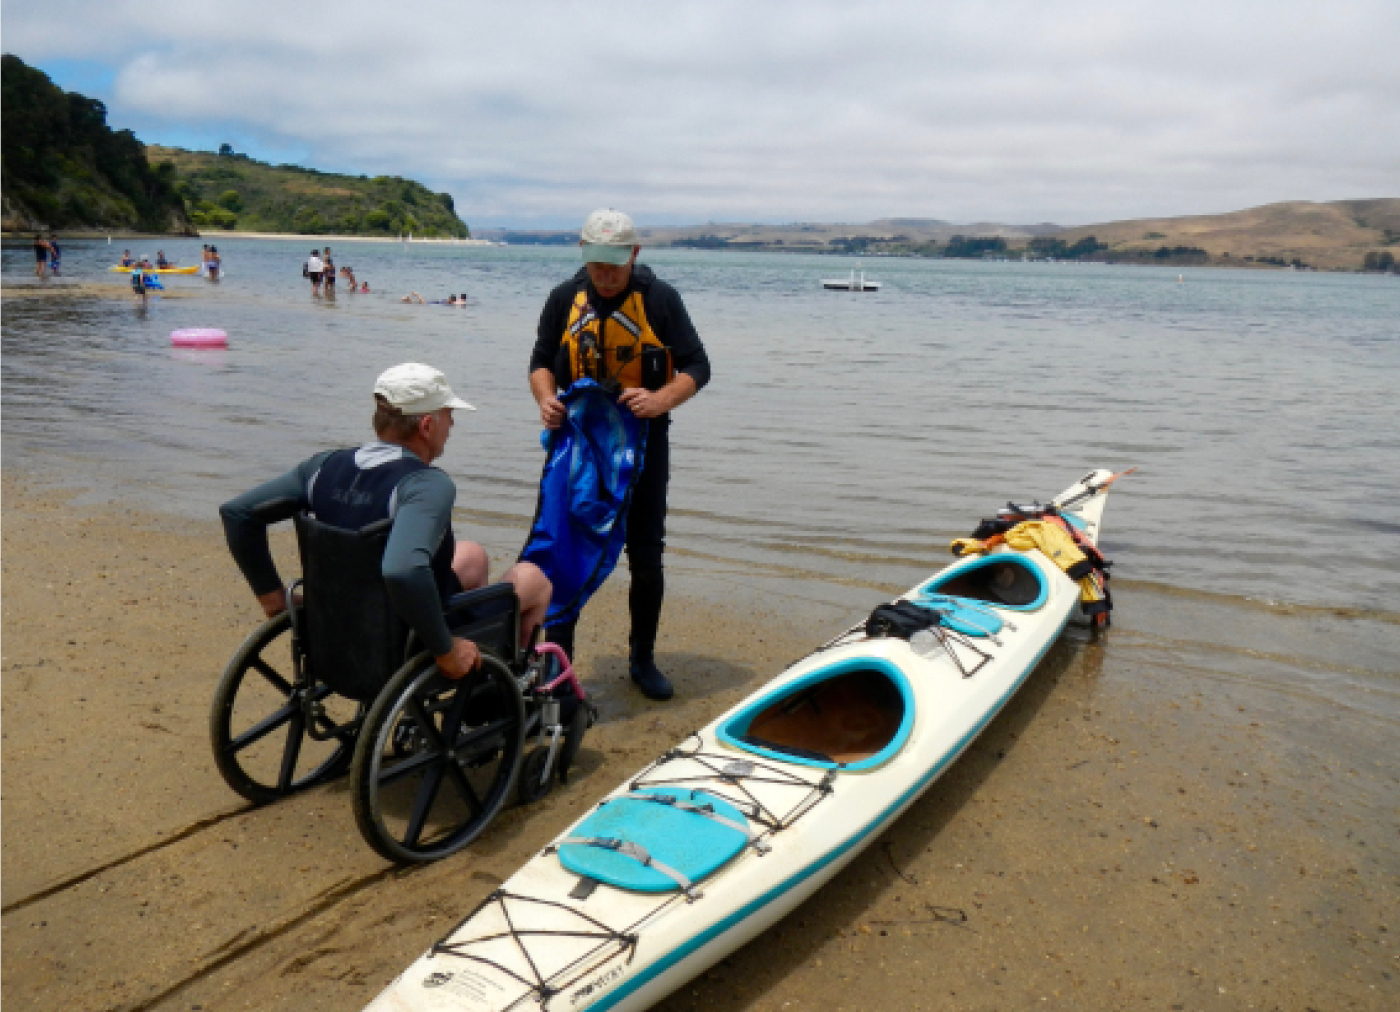 A man in a wheelchair on a sandy lake shore prepares to get into a tandem kayak with a friend